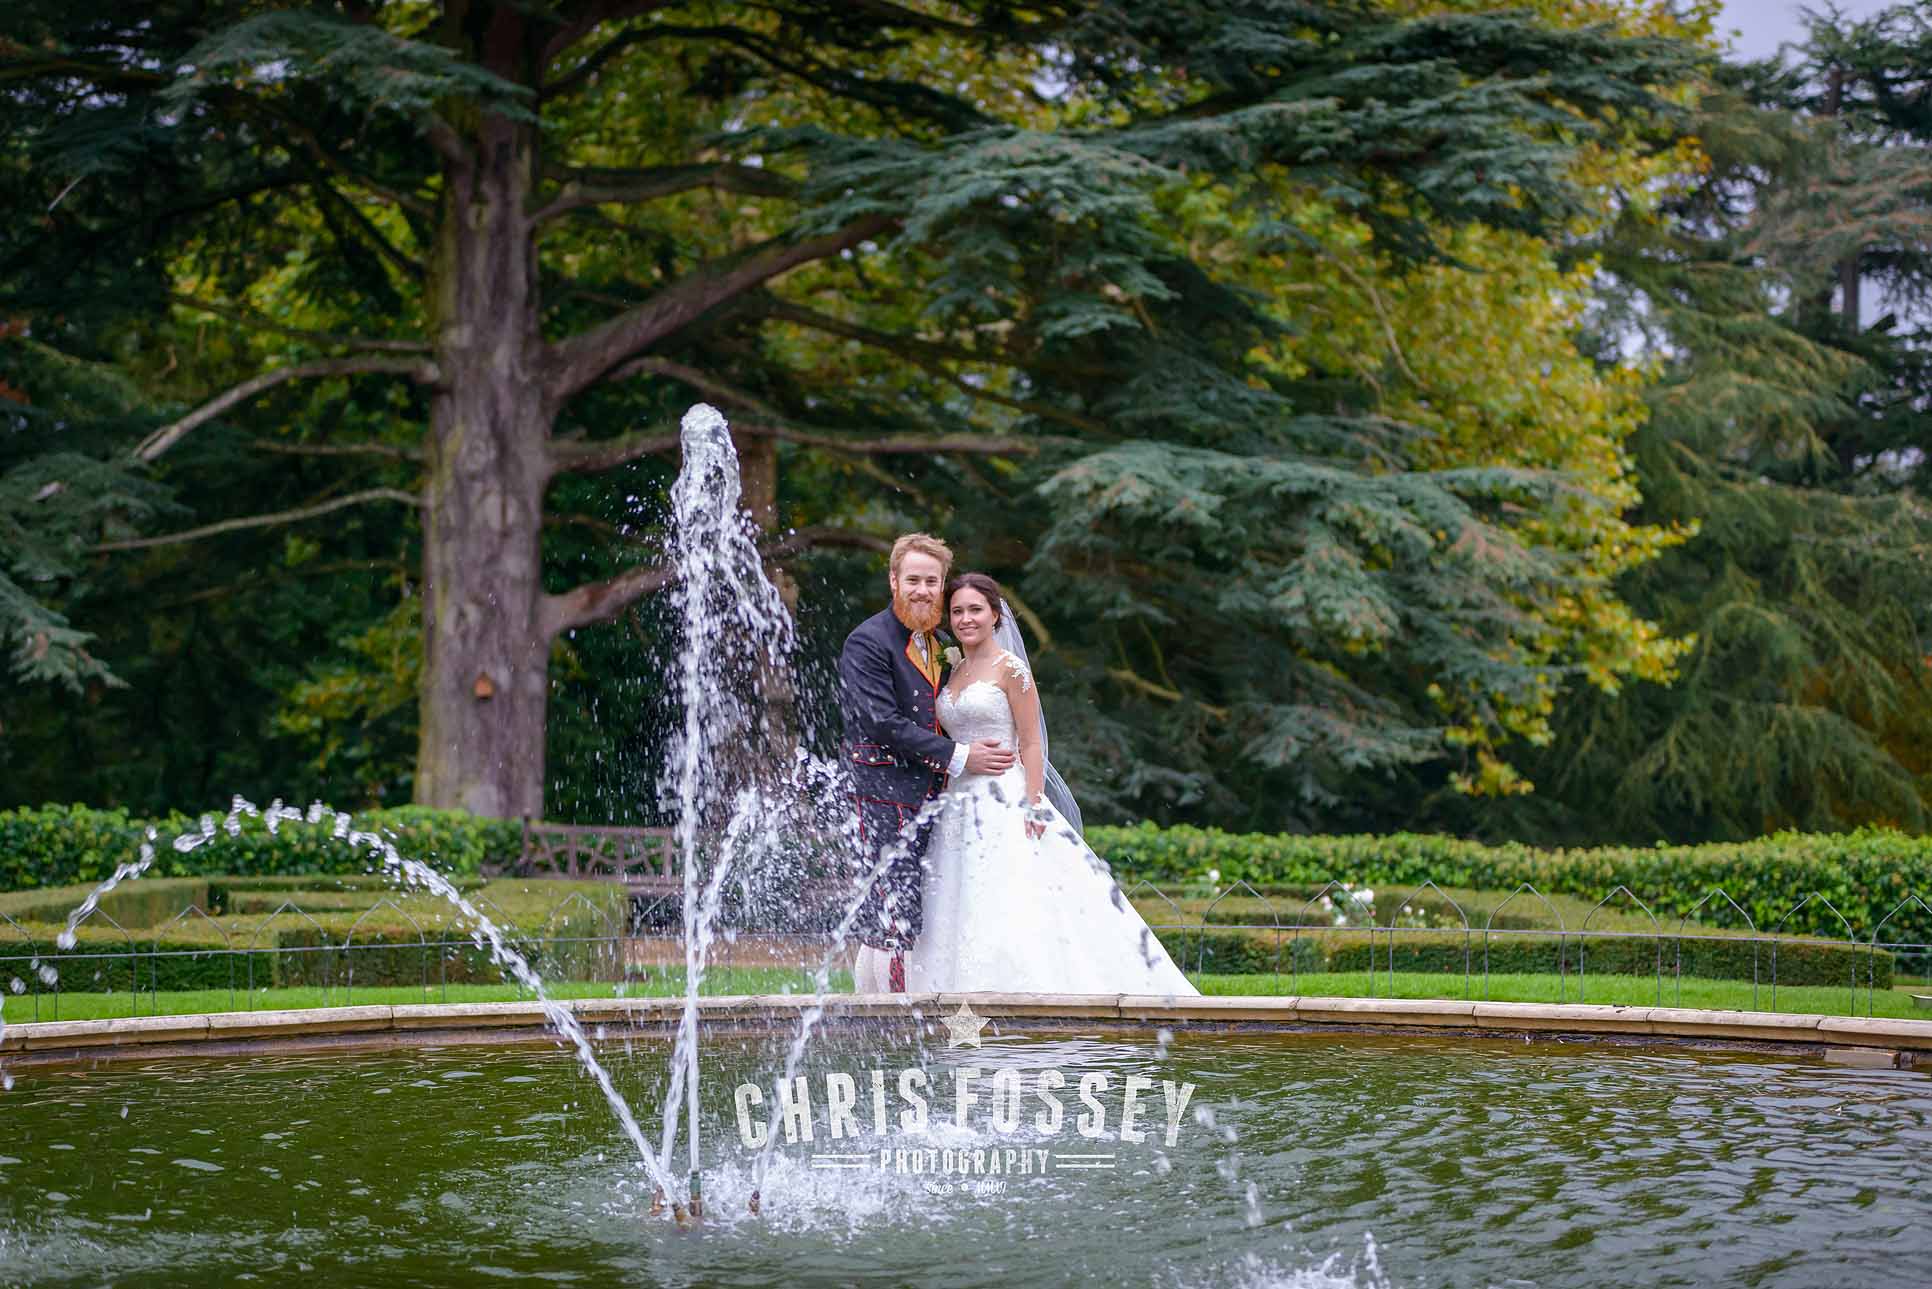 Warwick Castle Wedding Photography by Chris Fossey Photography